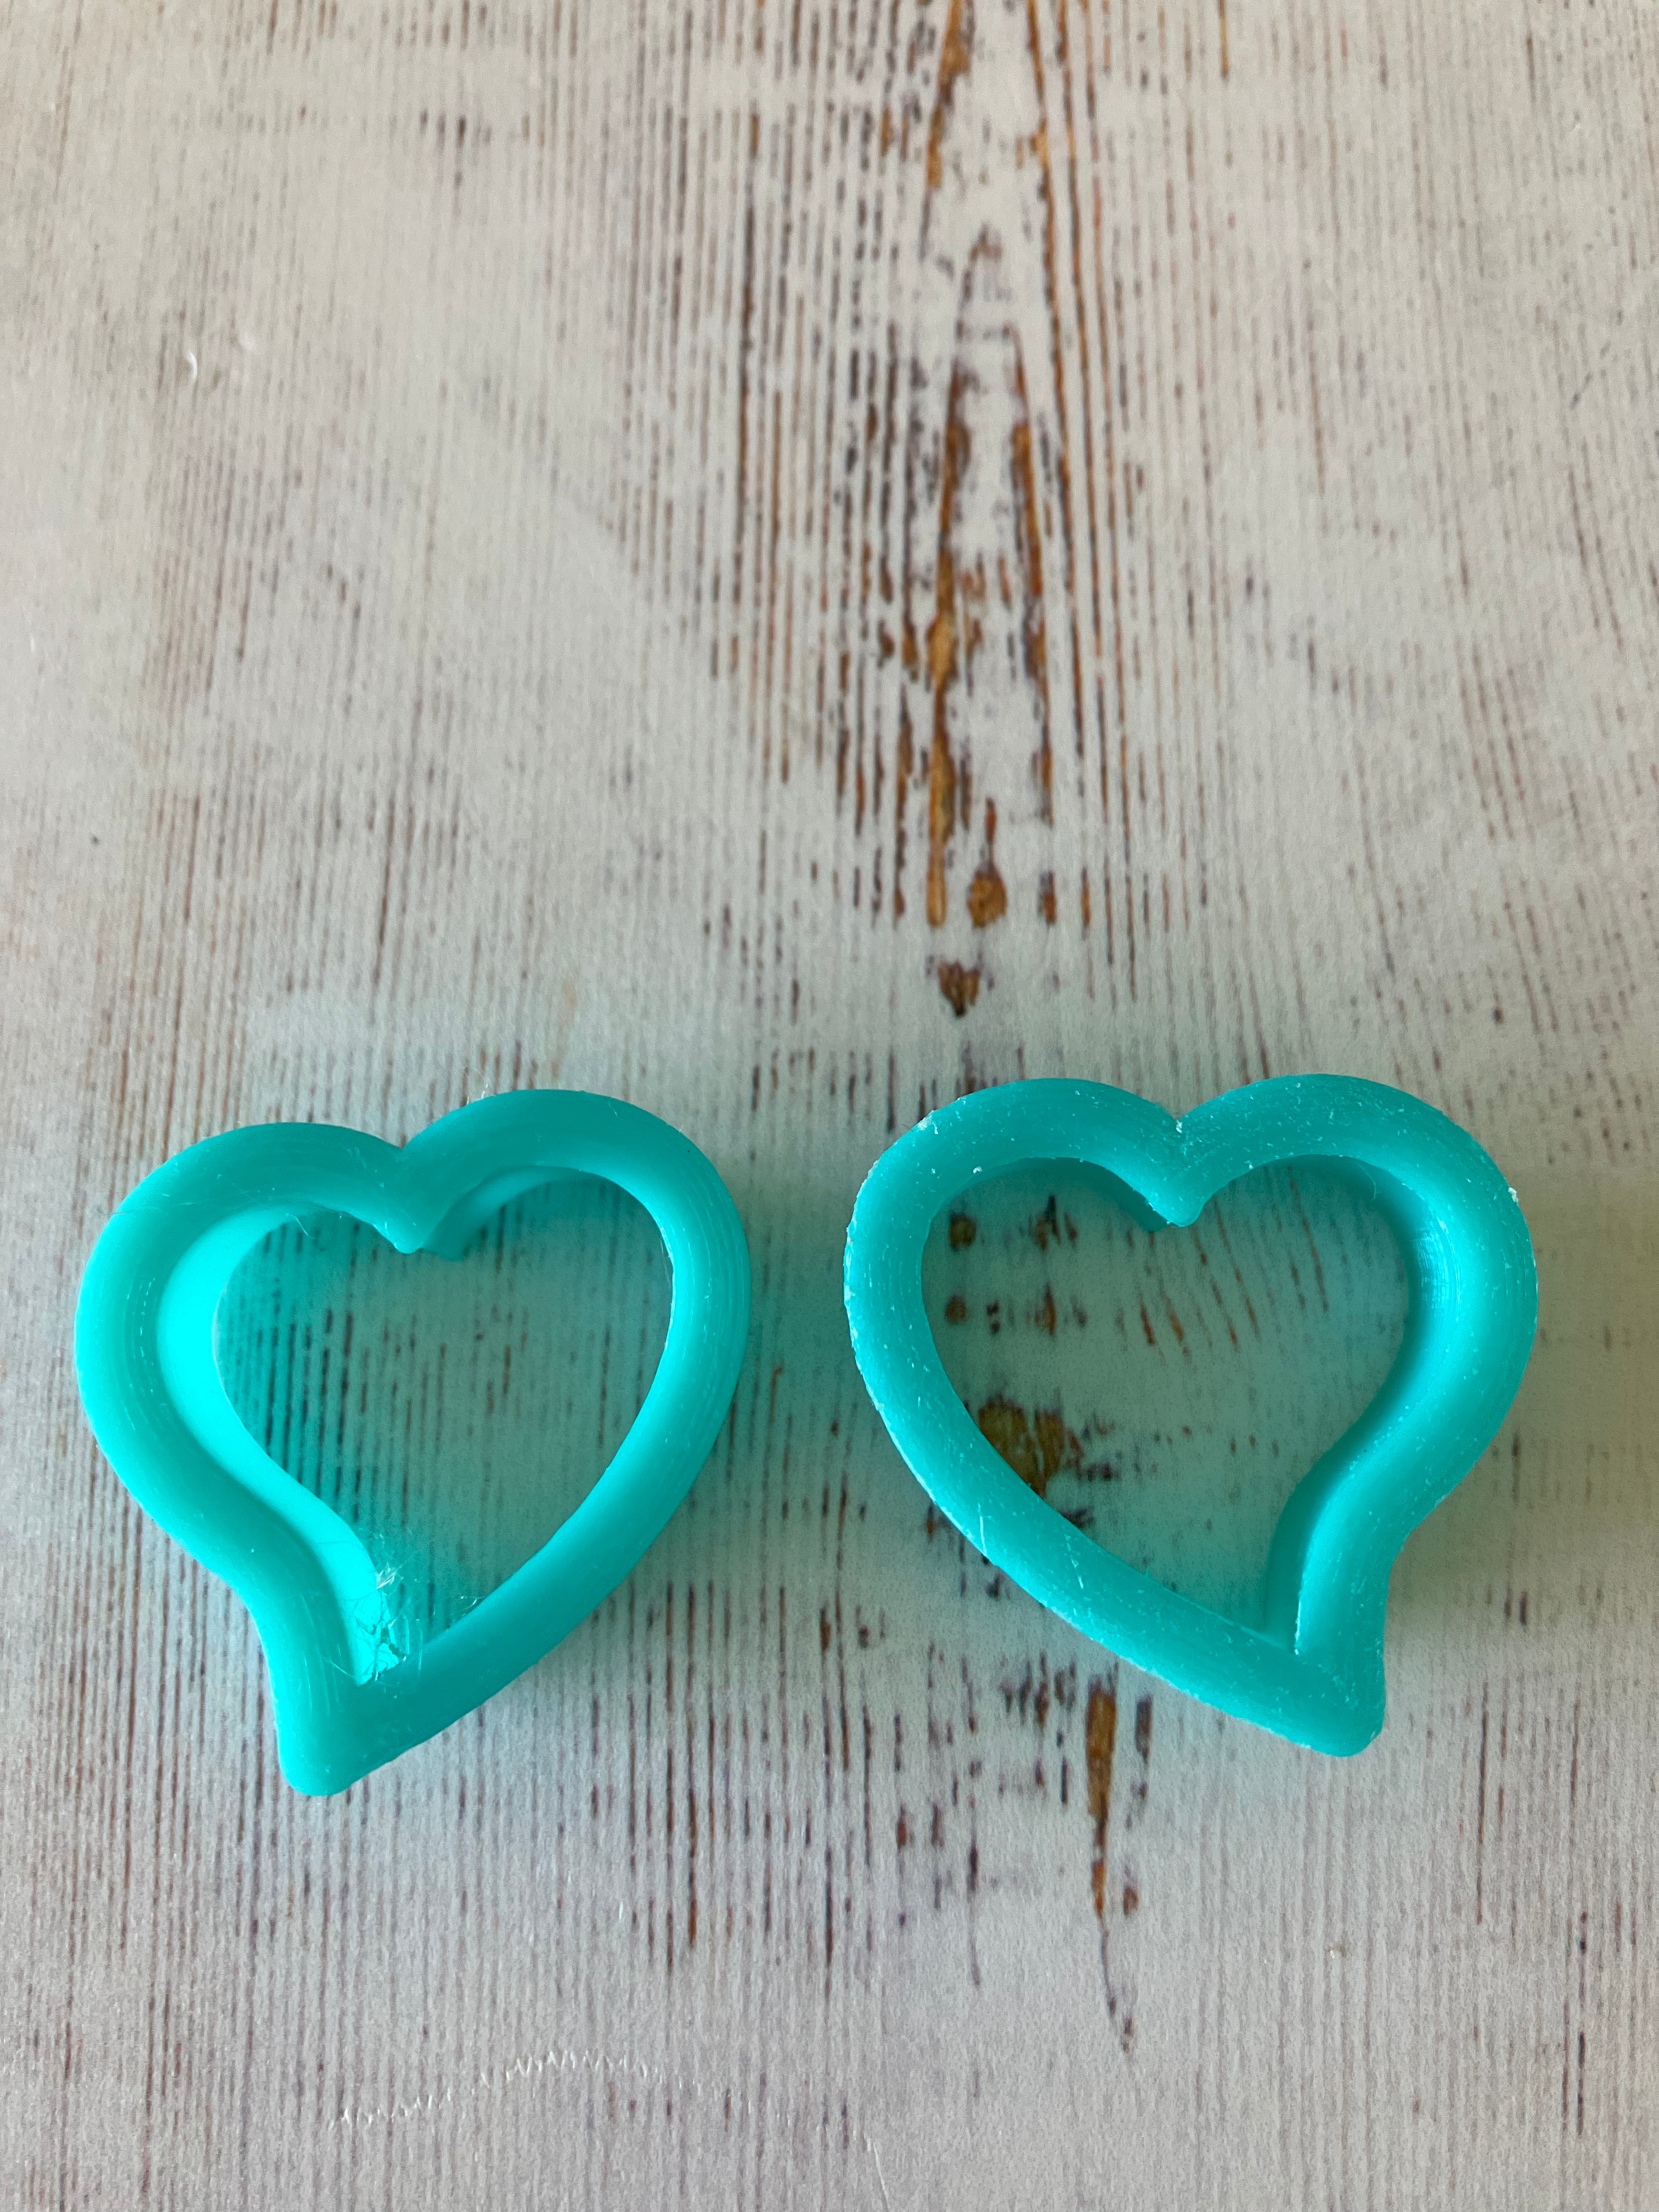 3D Gizmo's - Curved Hearts 25 MM (2 Cutters)